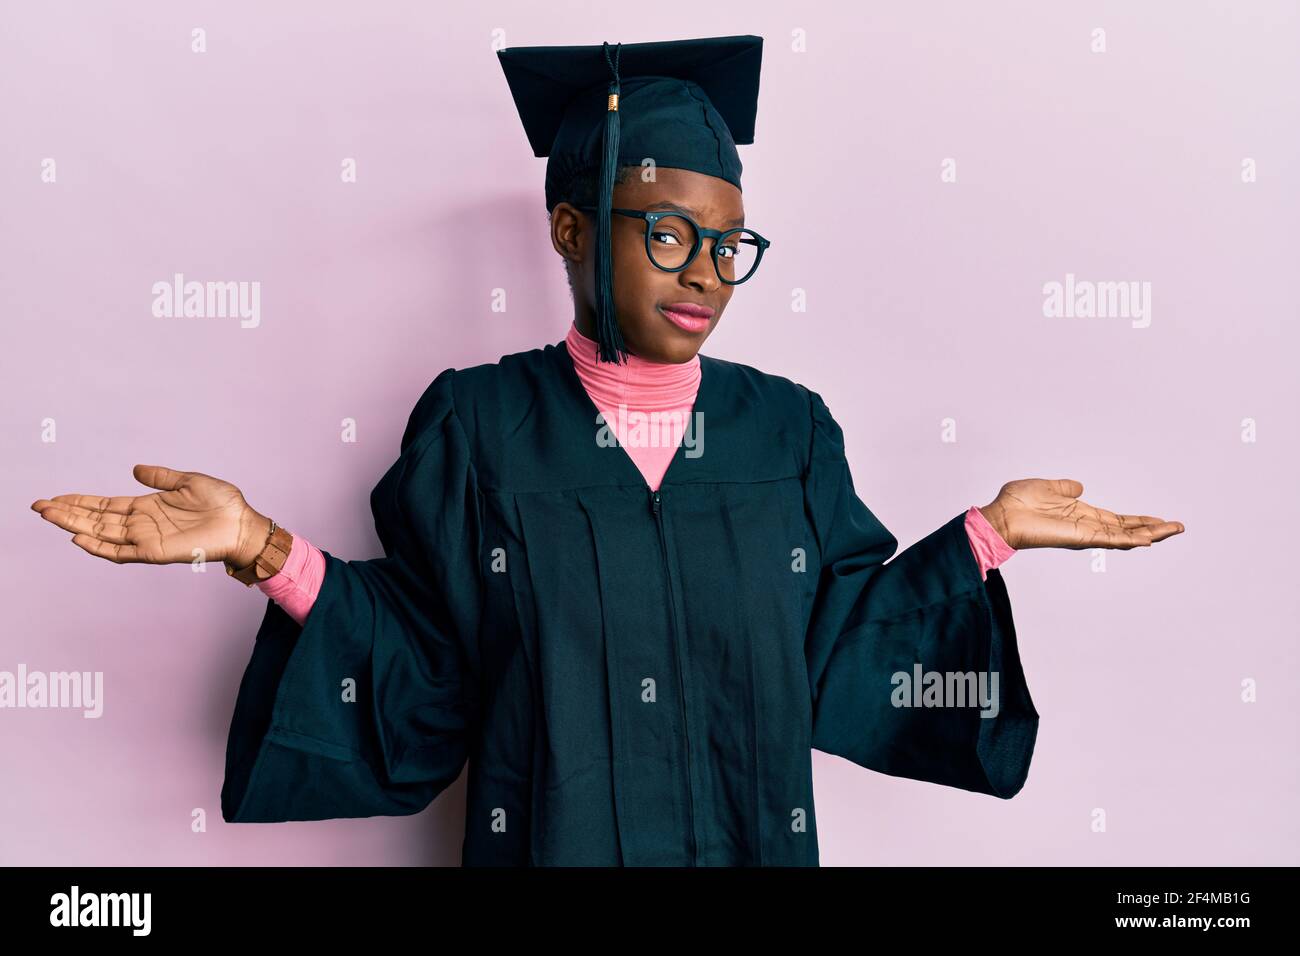 Young african american girl wearing graduation cap and ceremony robe clueless and confused expression with arms and hands raised. doubt concept. Stock Photo